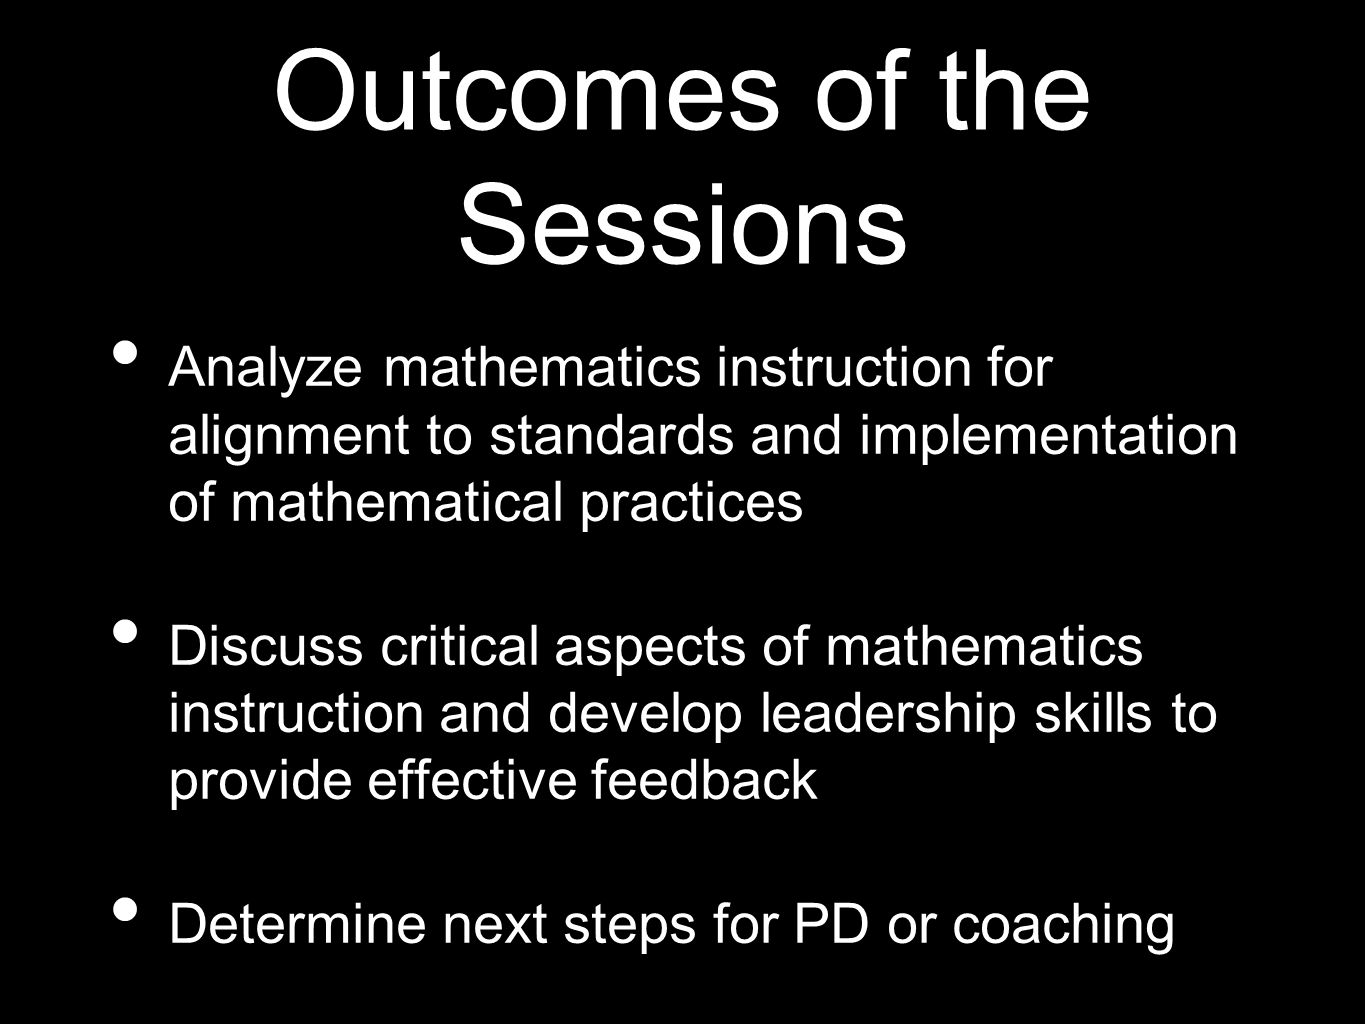 Outcomes of the Sessions Analyze mathematics instruction for alignment to standards and implementation of mathematical practices Discuss critical aspects of mathematics instruction and develop leadership skills to provide effective feedback Determine next steps for PD or coaching